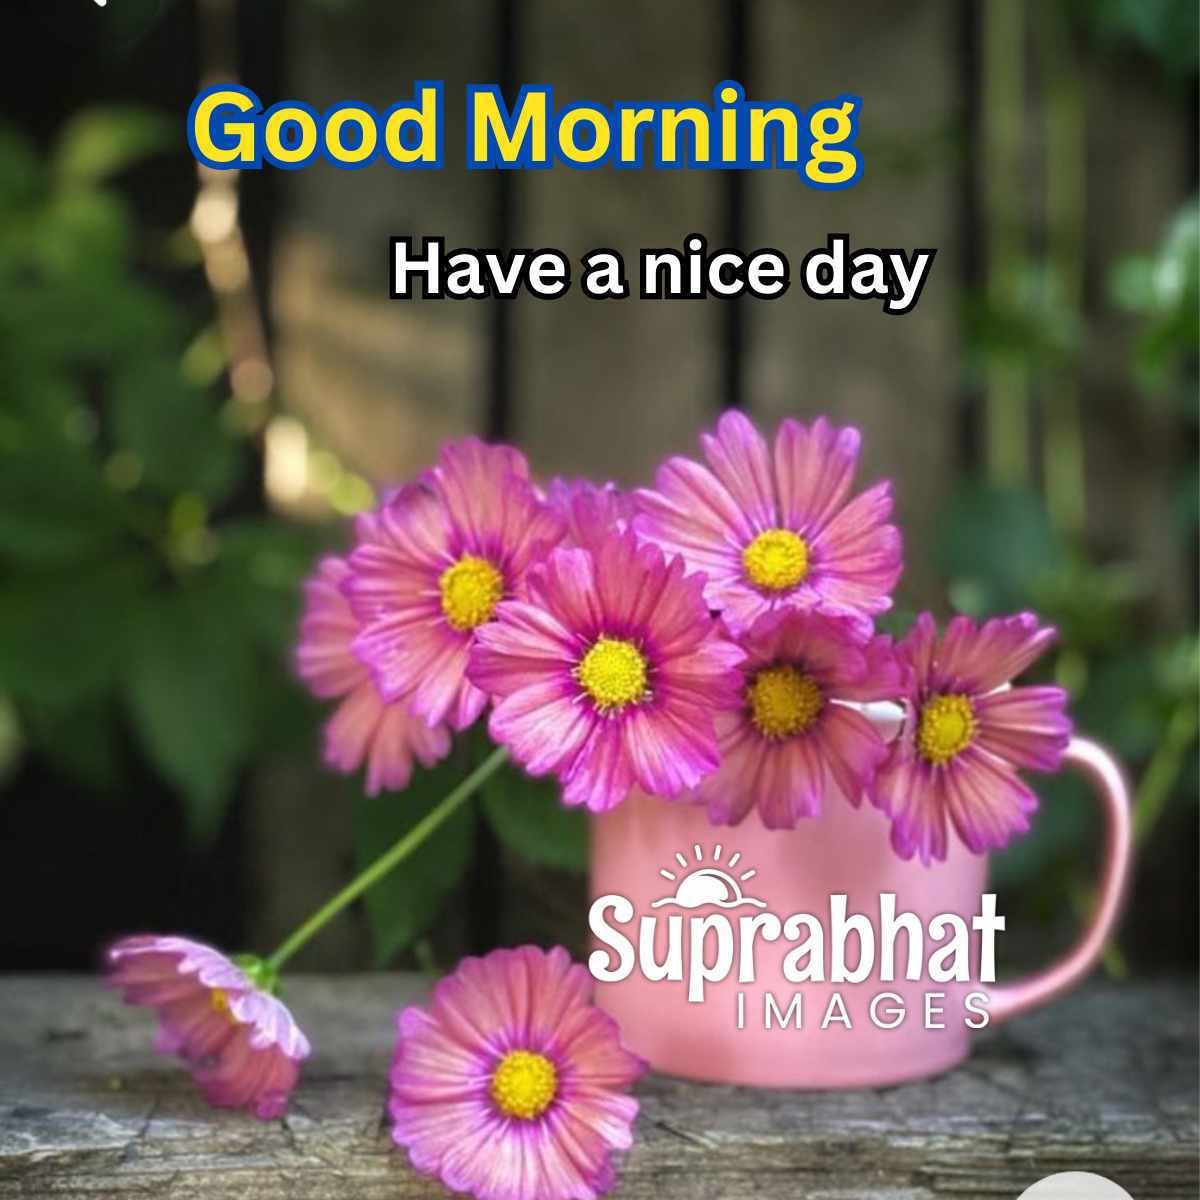 Good Morning Image with Flower and Decorative Pot